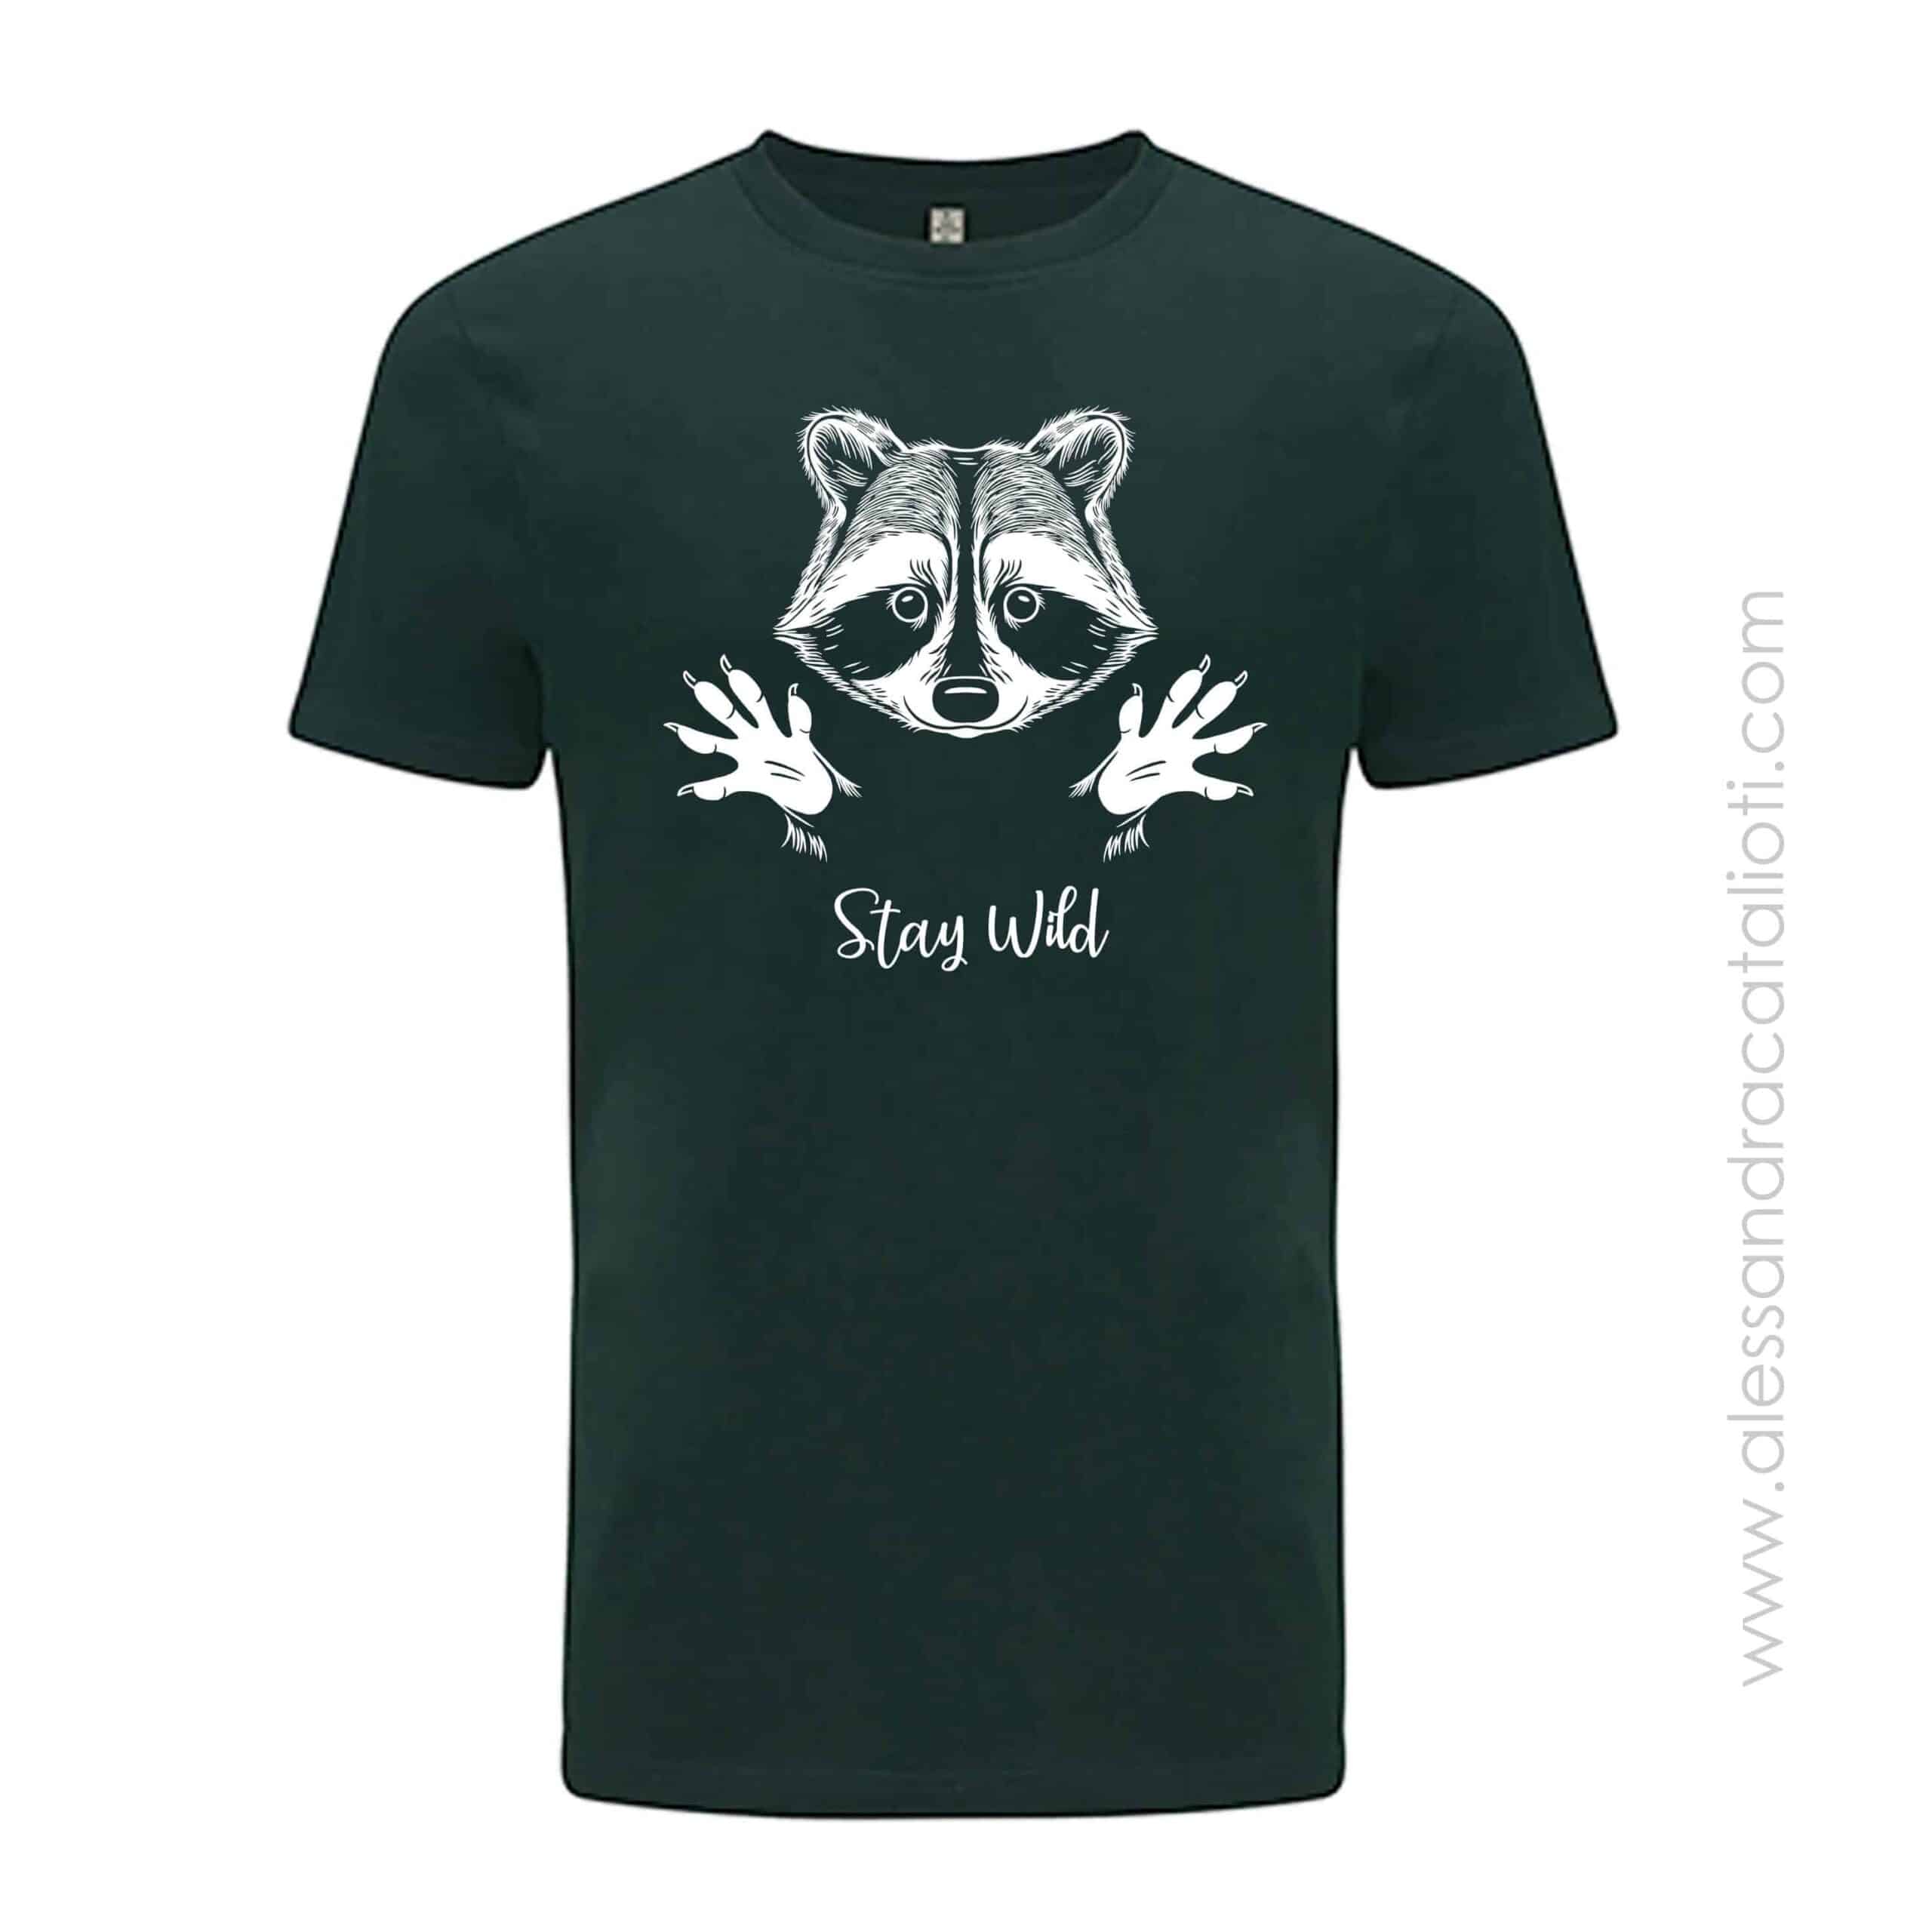 made recycled unisex 100% material - from Vegan raccoon t-shirt